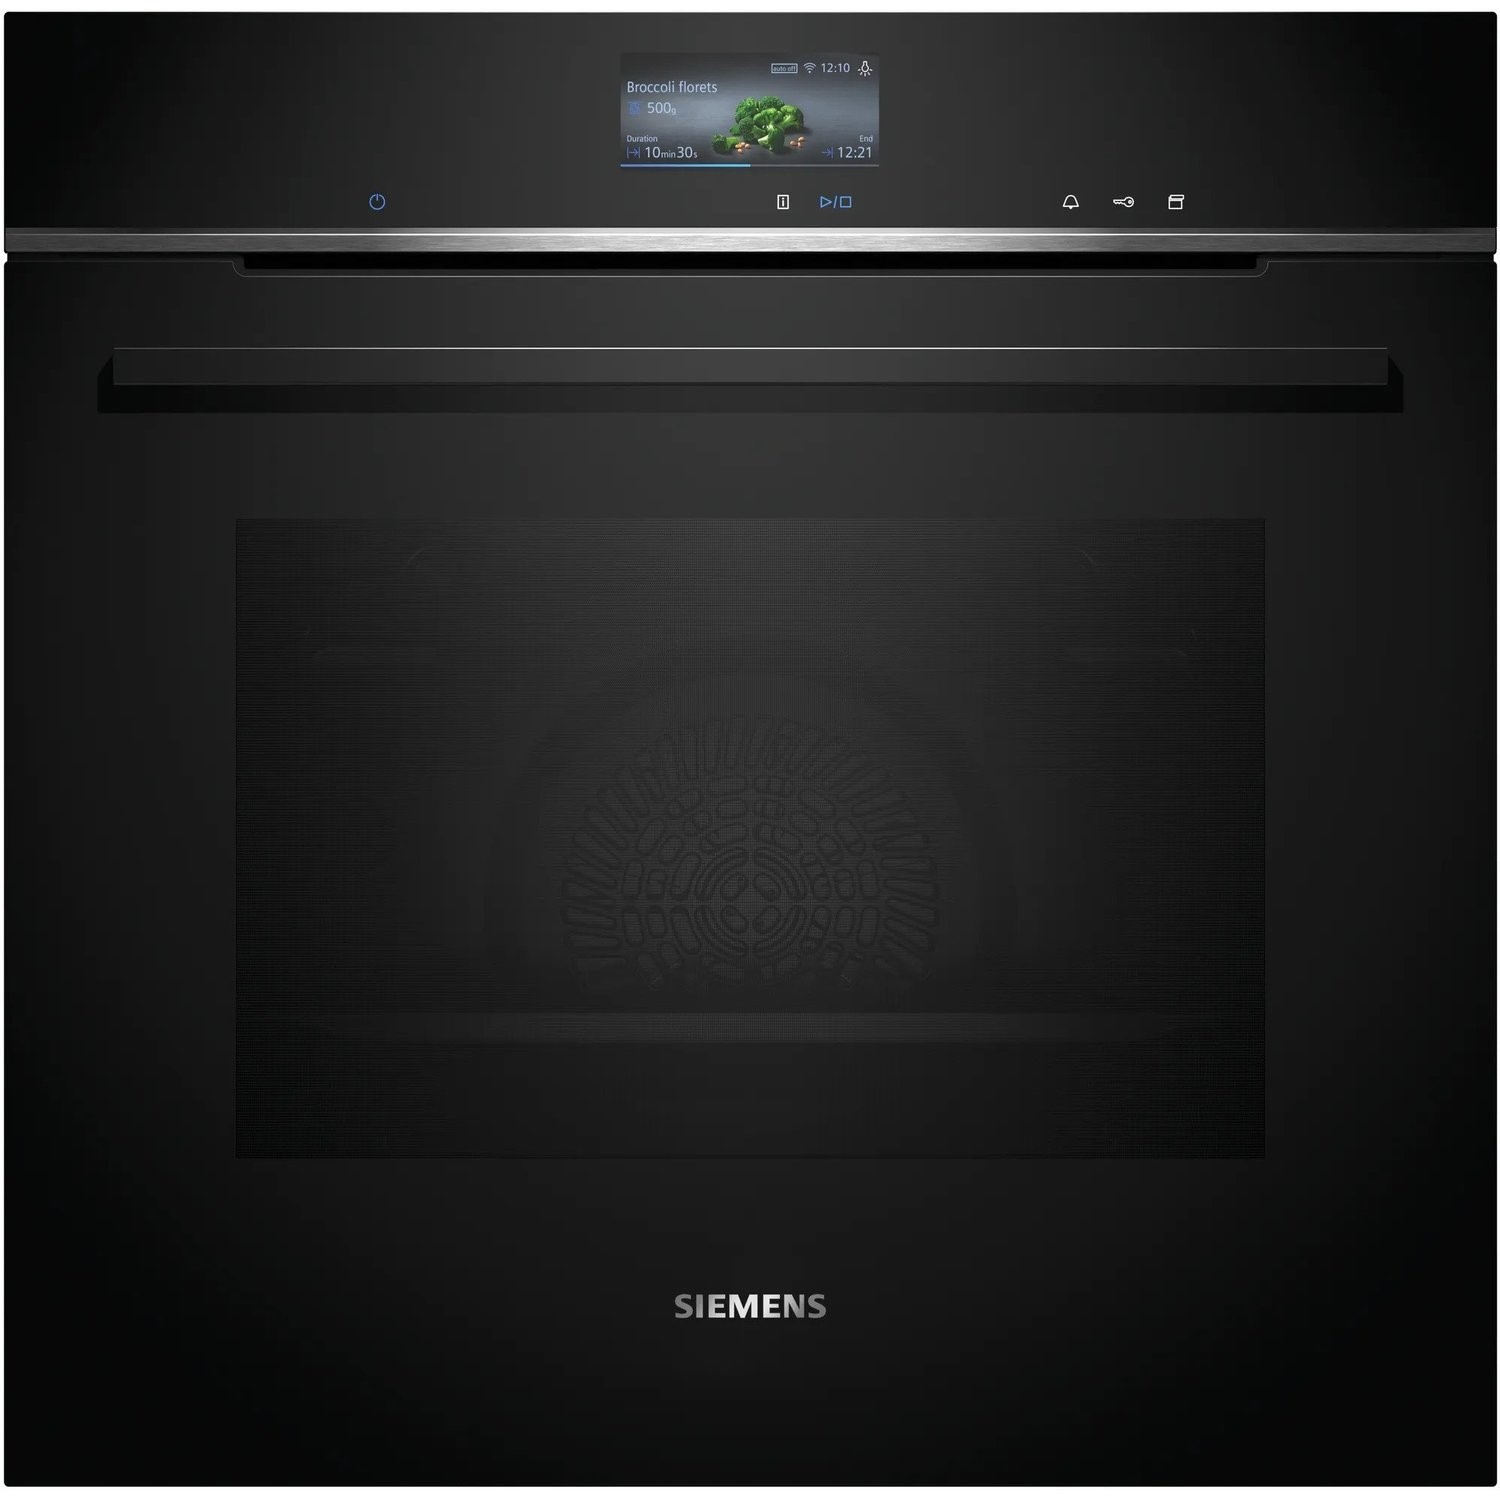 Photos - Oven Siemens iQ700 Electric Single  with Steam Function - Black HS736G1B1B 